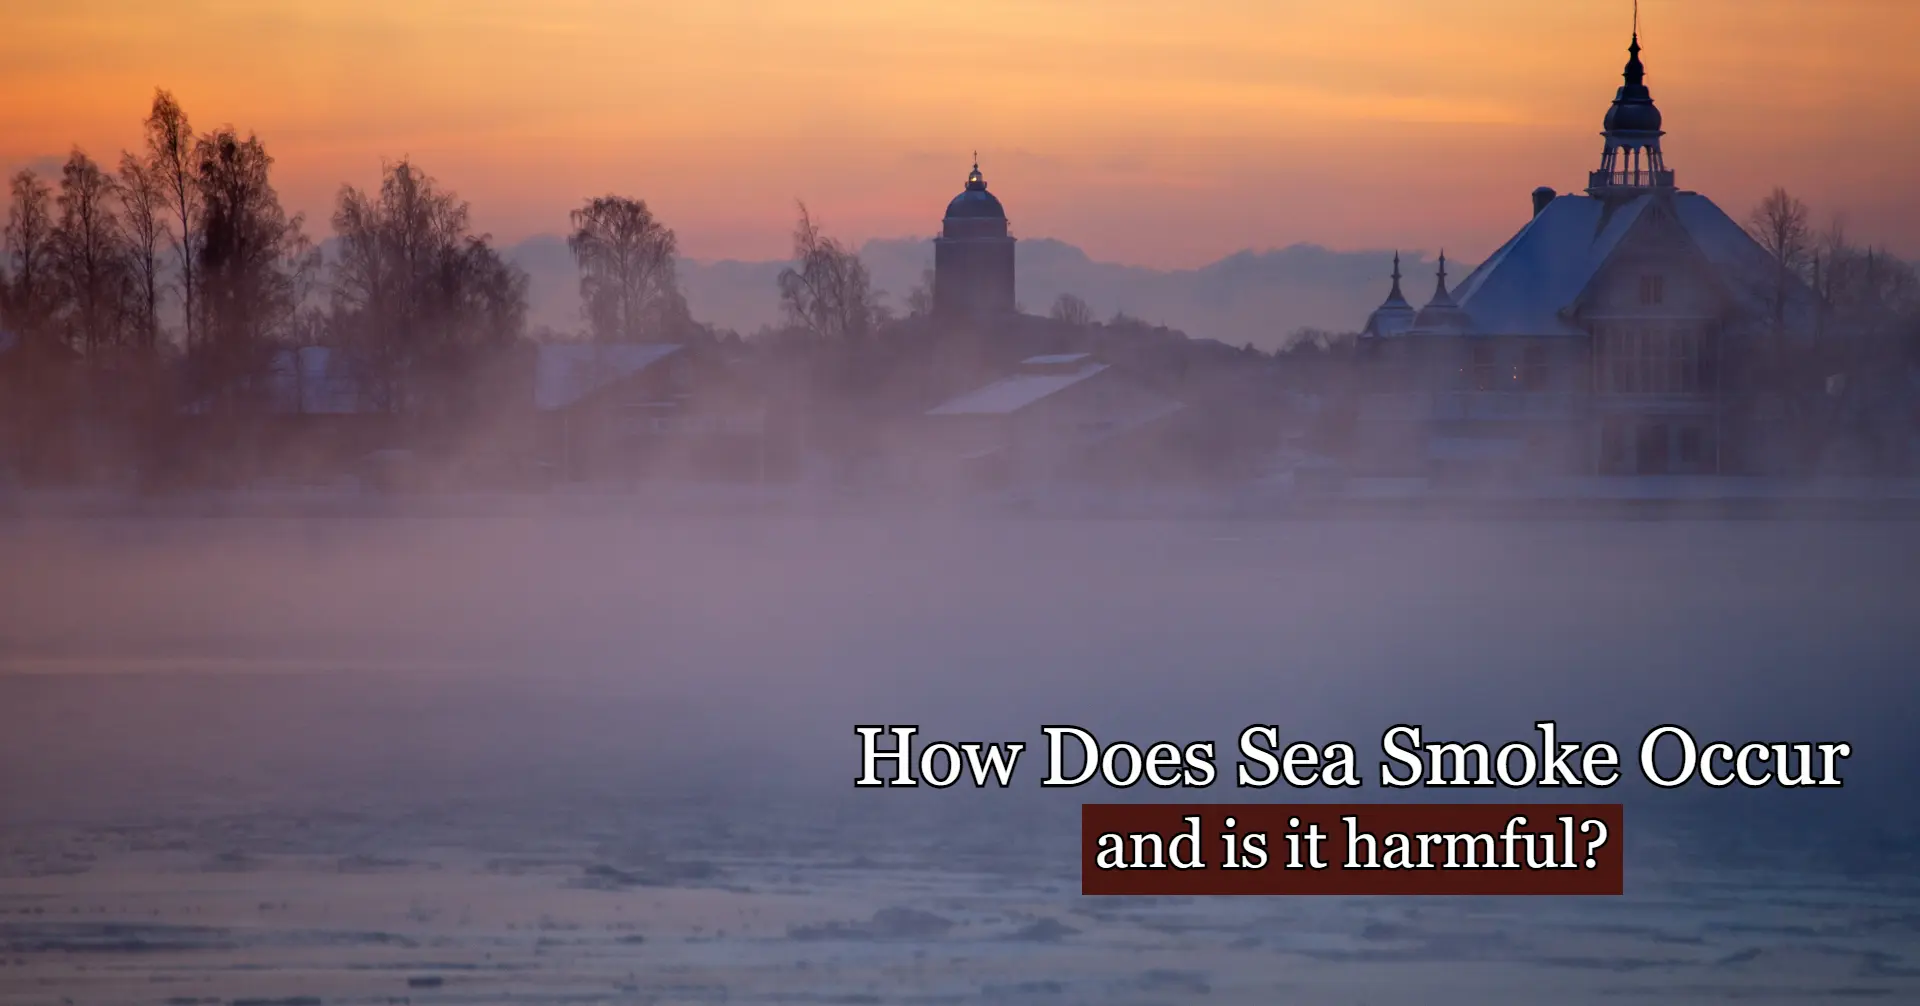 How Does Sea Smoke Occur and Is It Harmful?